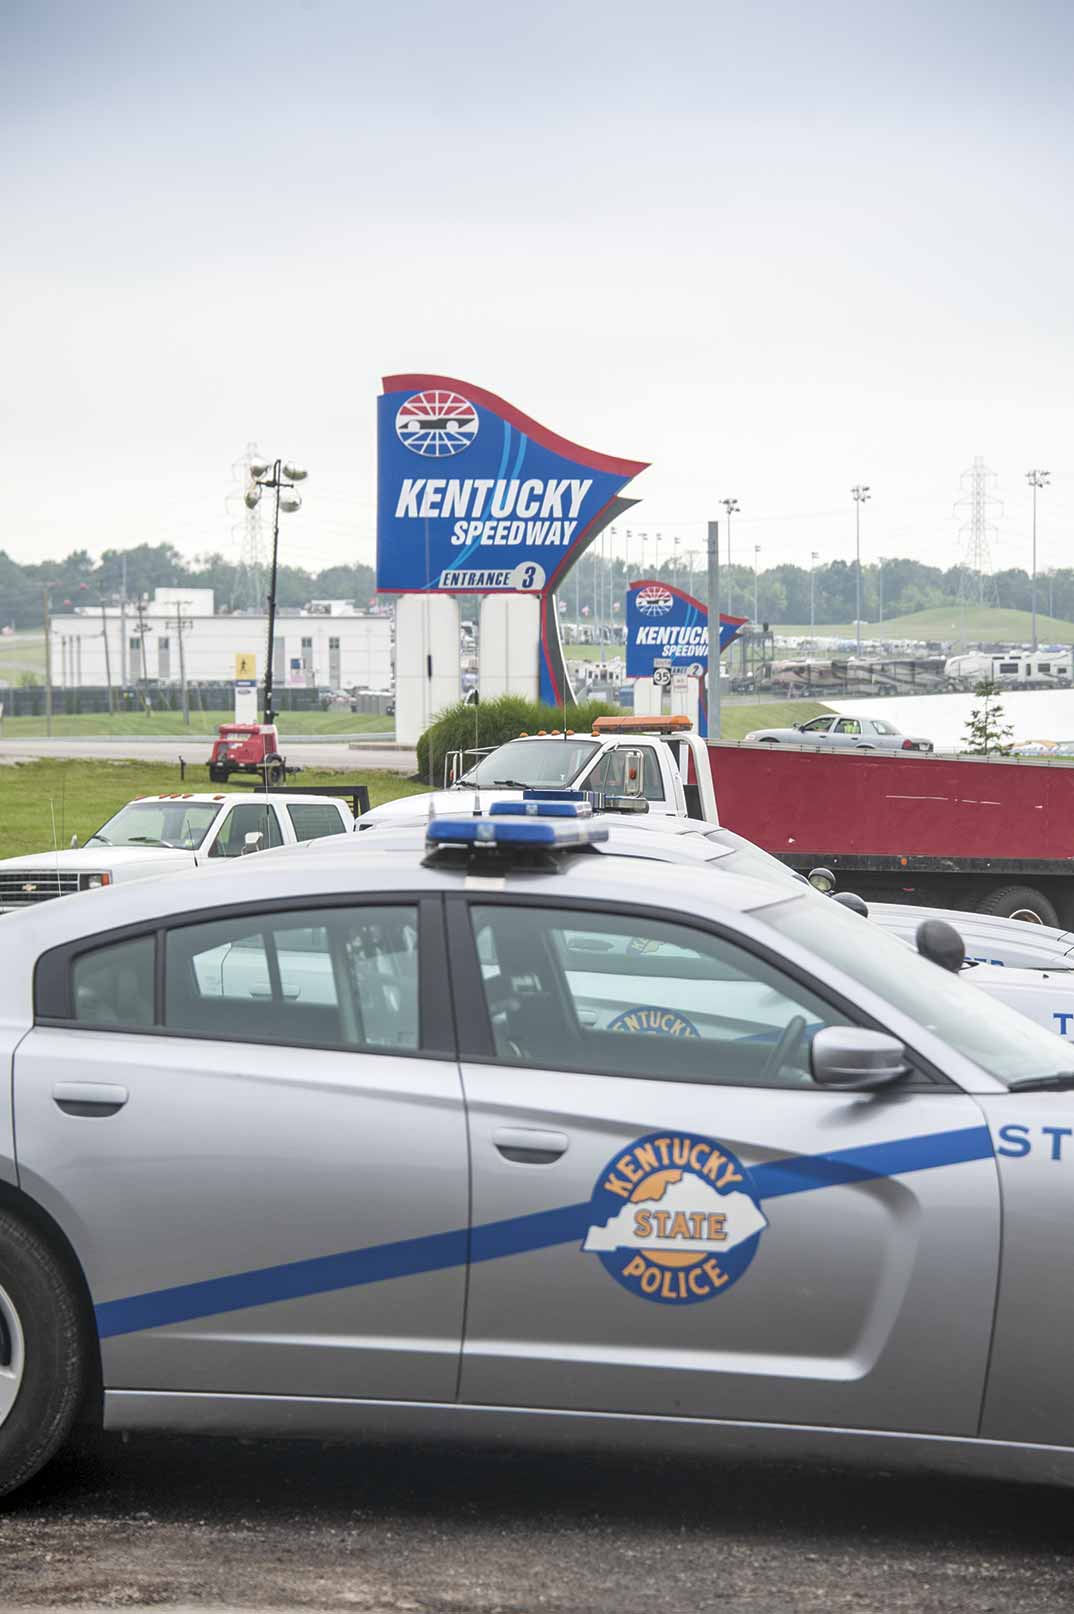  The Kentucky Speedway adds additional challenges to the Gallatin County Sheriff’s Office. Each year approximately 80,000 people flood the speedway and surrounding campgrounds. (Photo by Jim Robertson) 